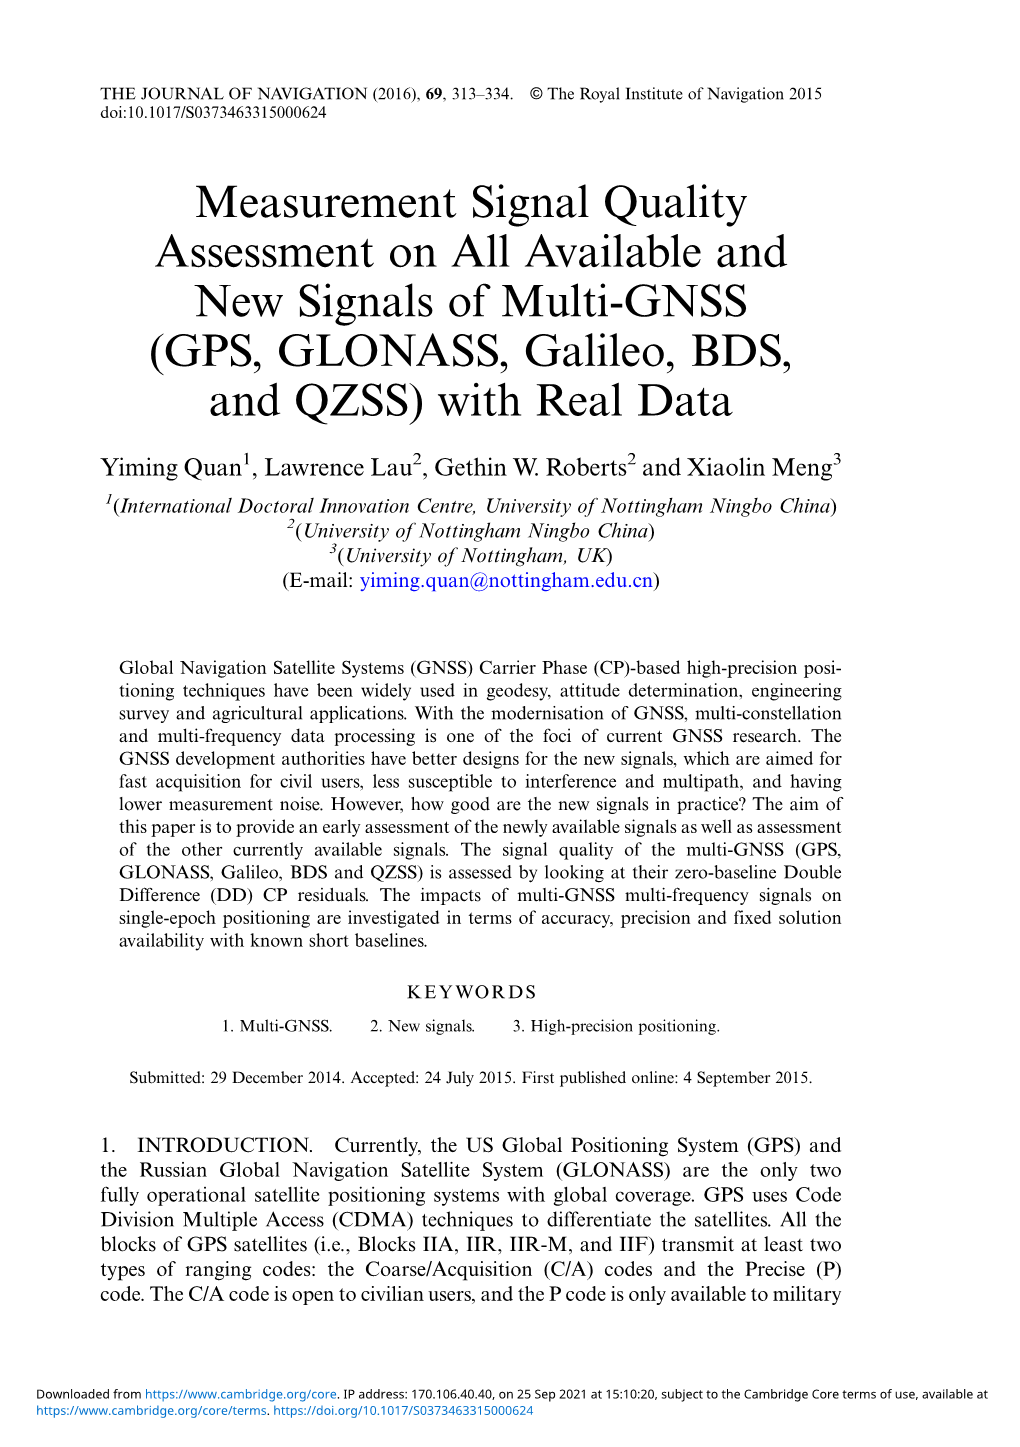 (GPS, GLONASS, Galileo, BDS, and QZSS) with Real Data